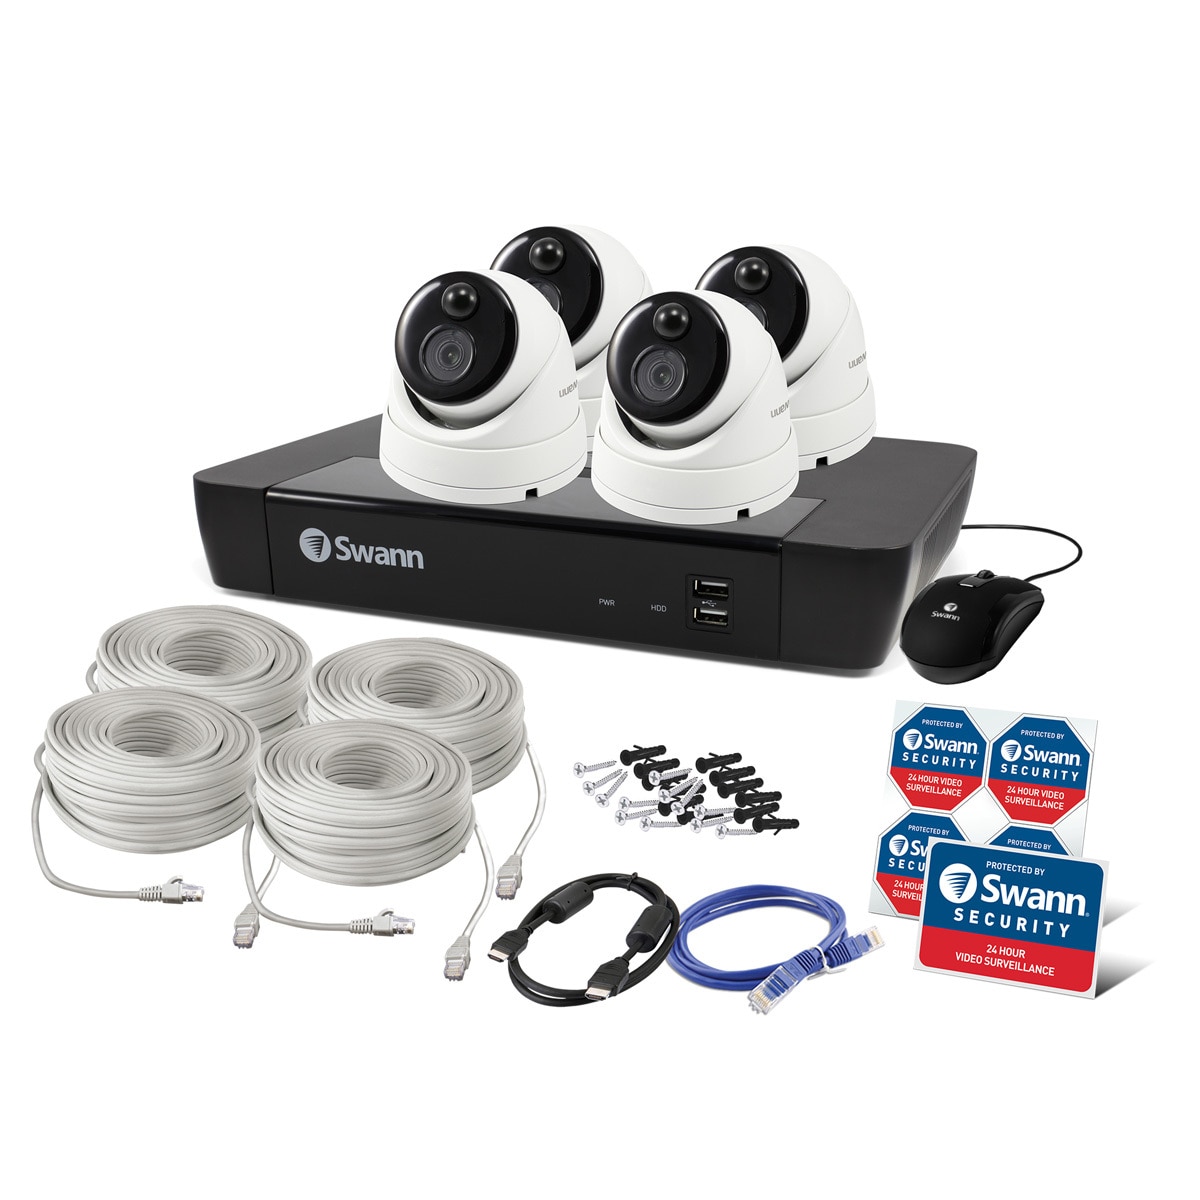 Swann 4 Camera 8 Channel Security System 4K Ultra HD NVR-8580 with 2TB HDD SWNVK-886804D-AU